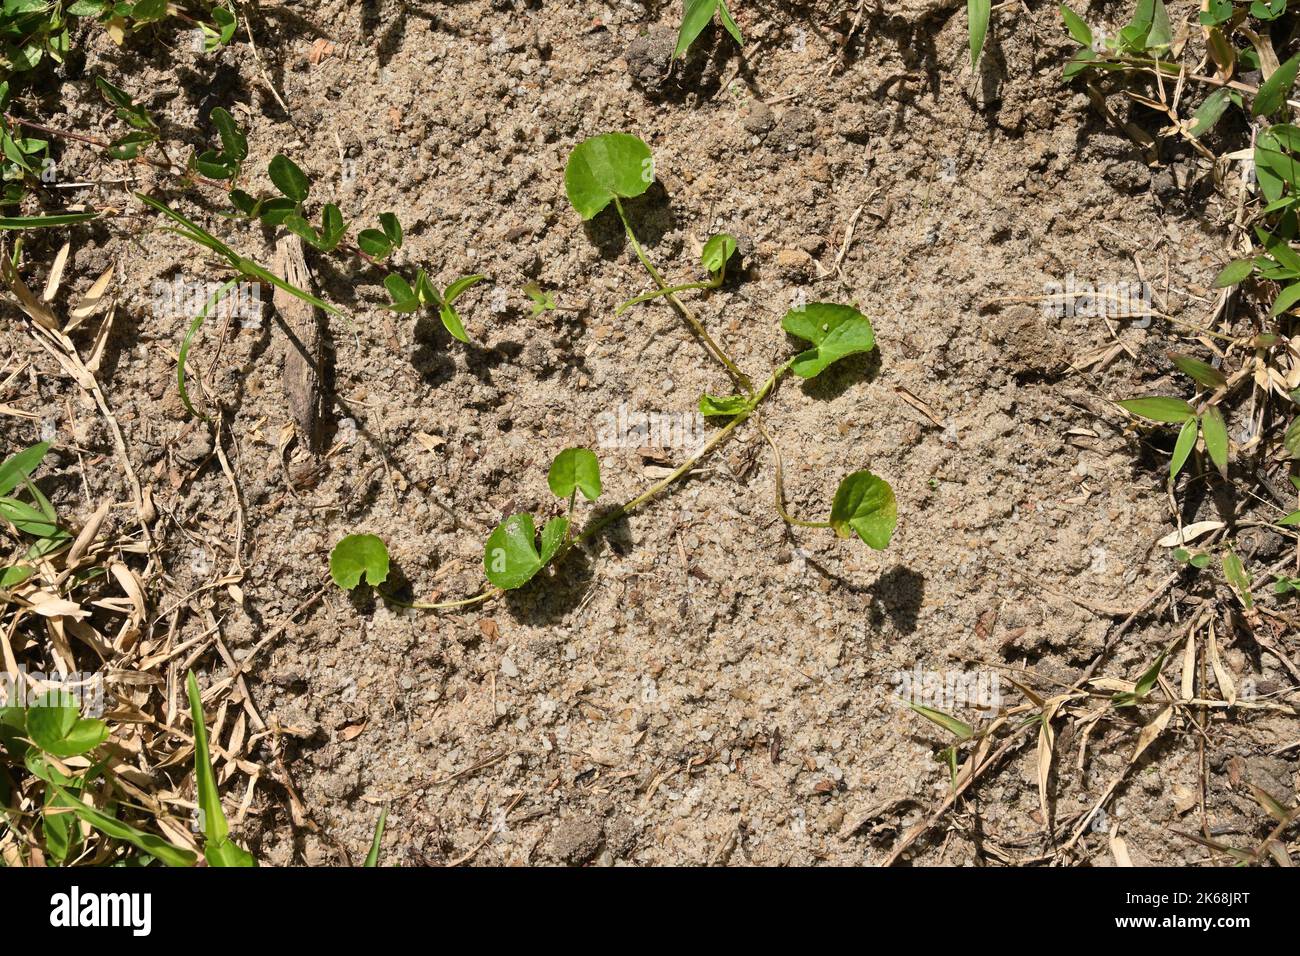 Overhead view of a growing Asiatic pennywort or Heen Gotukola plant (Centella Asiatica) on sandy ground with the surrounding grass Stock Photo